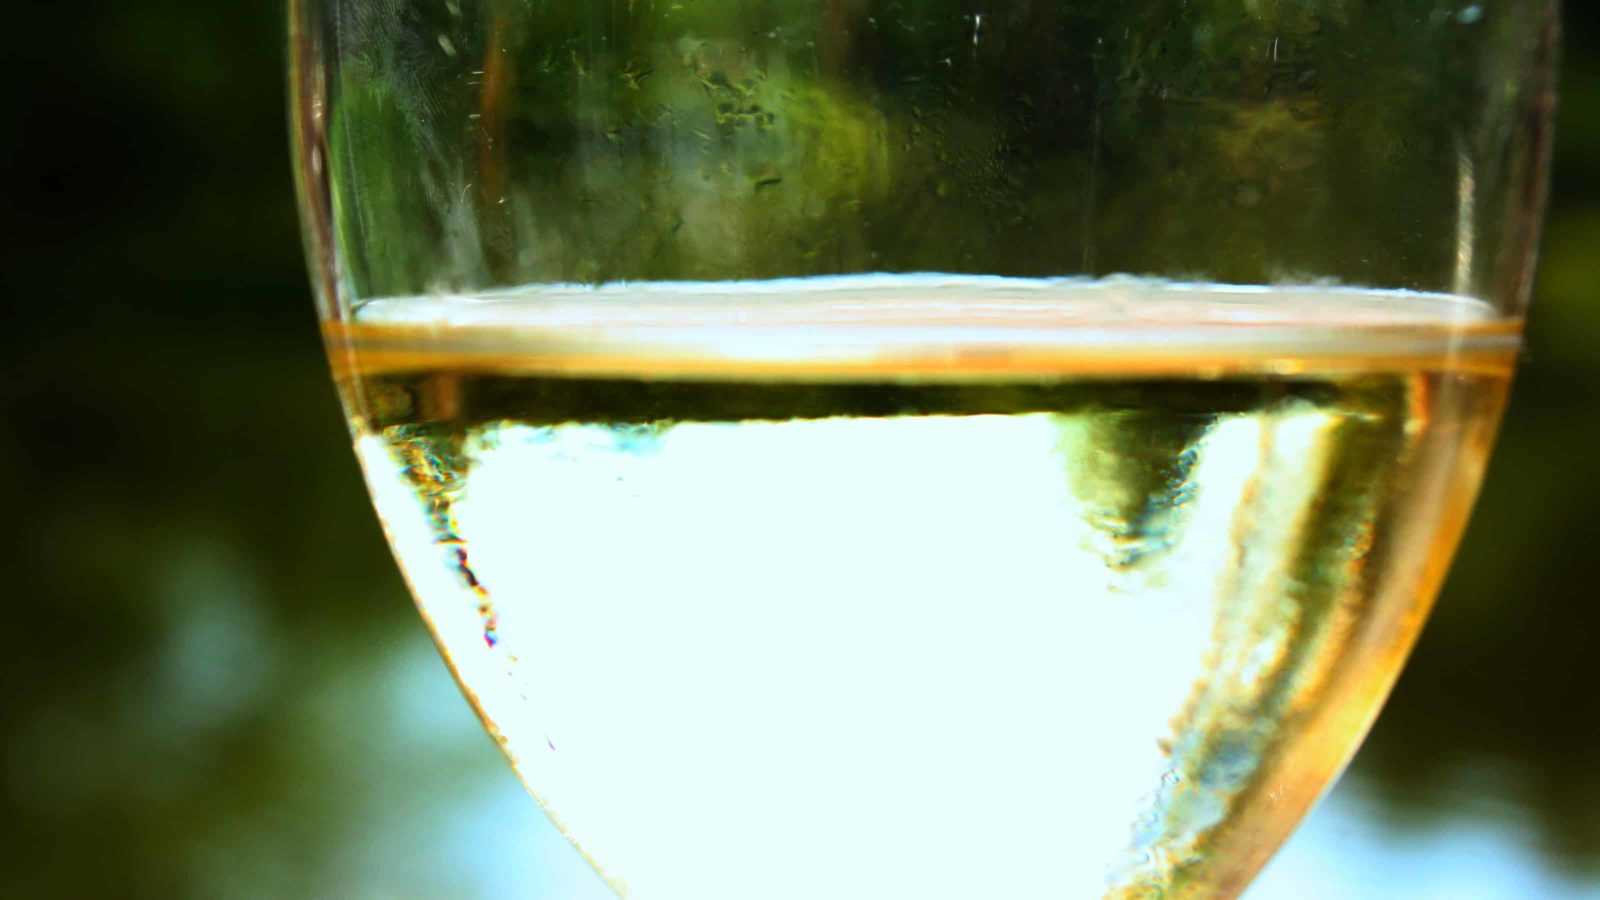 A glass of white wine shimmers against dark green trees. Creative Commons courtesy photo